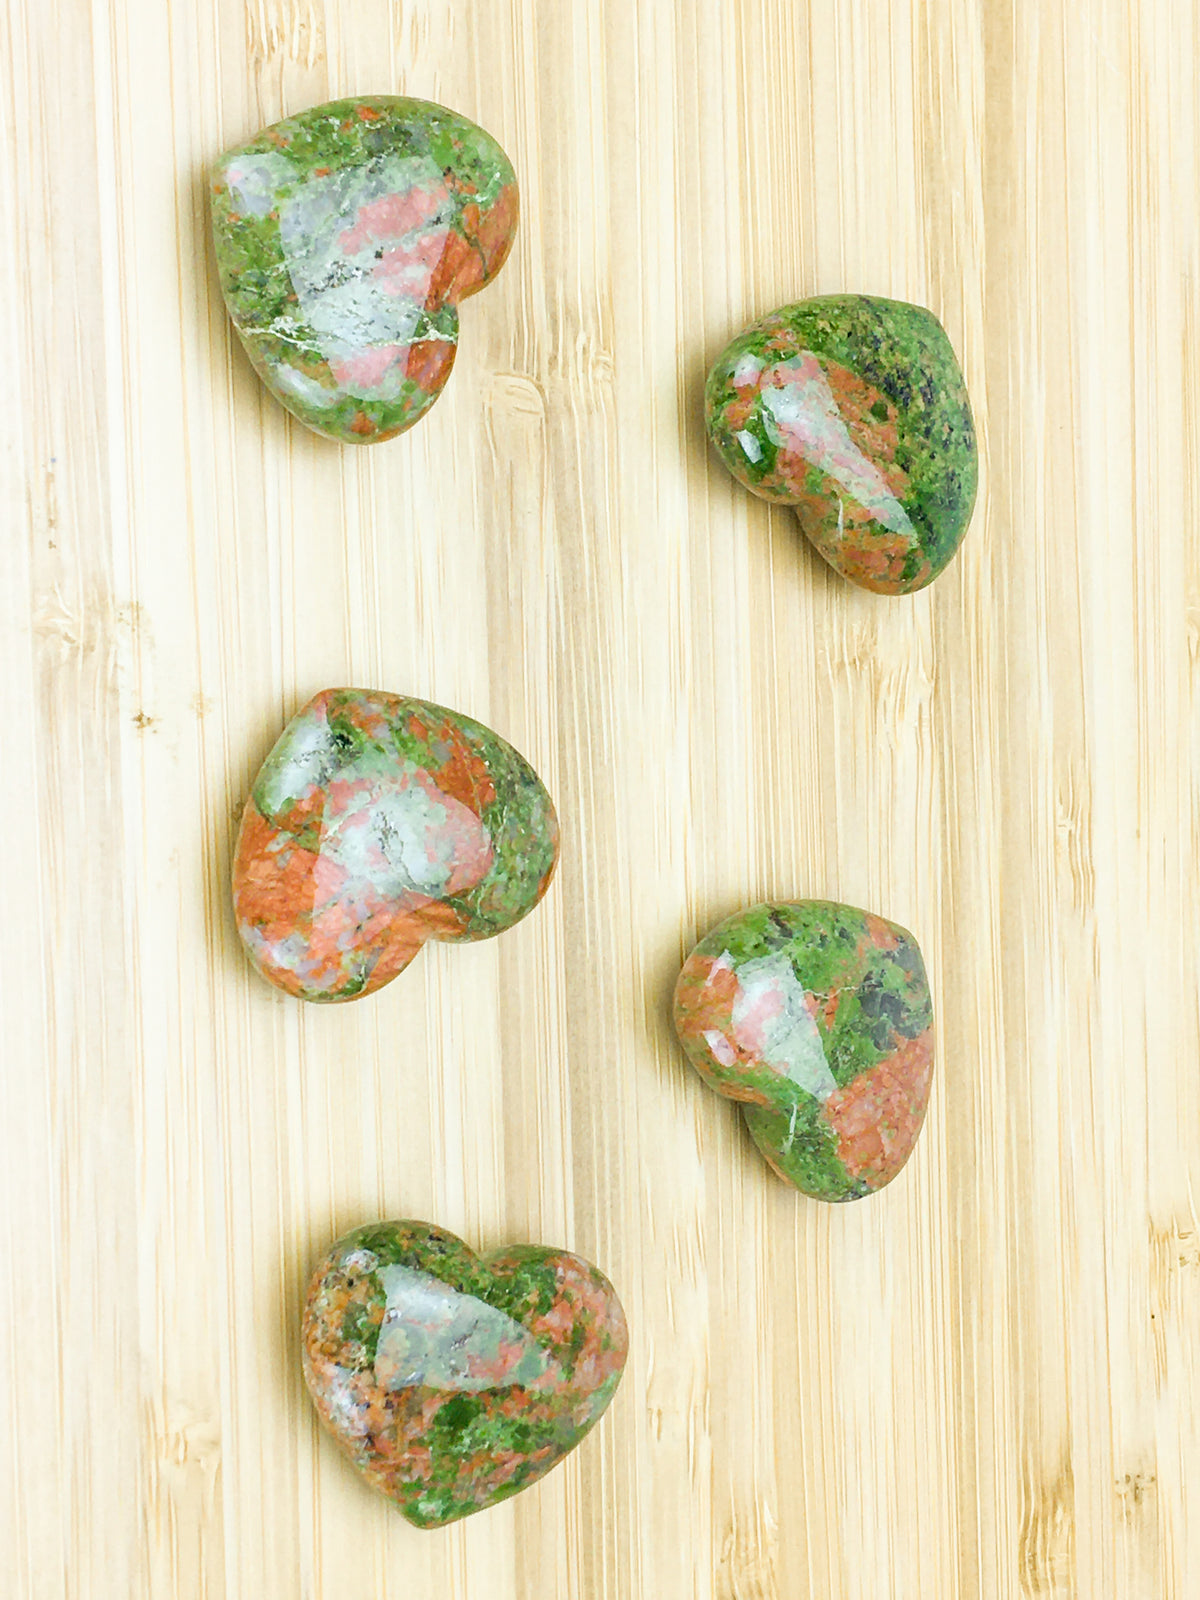 Five unakite hearts on a pale wood grain surface.